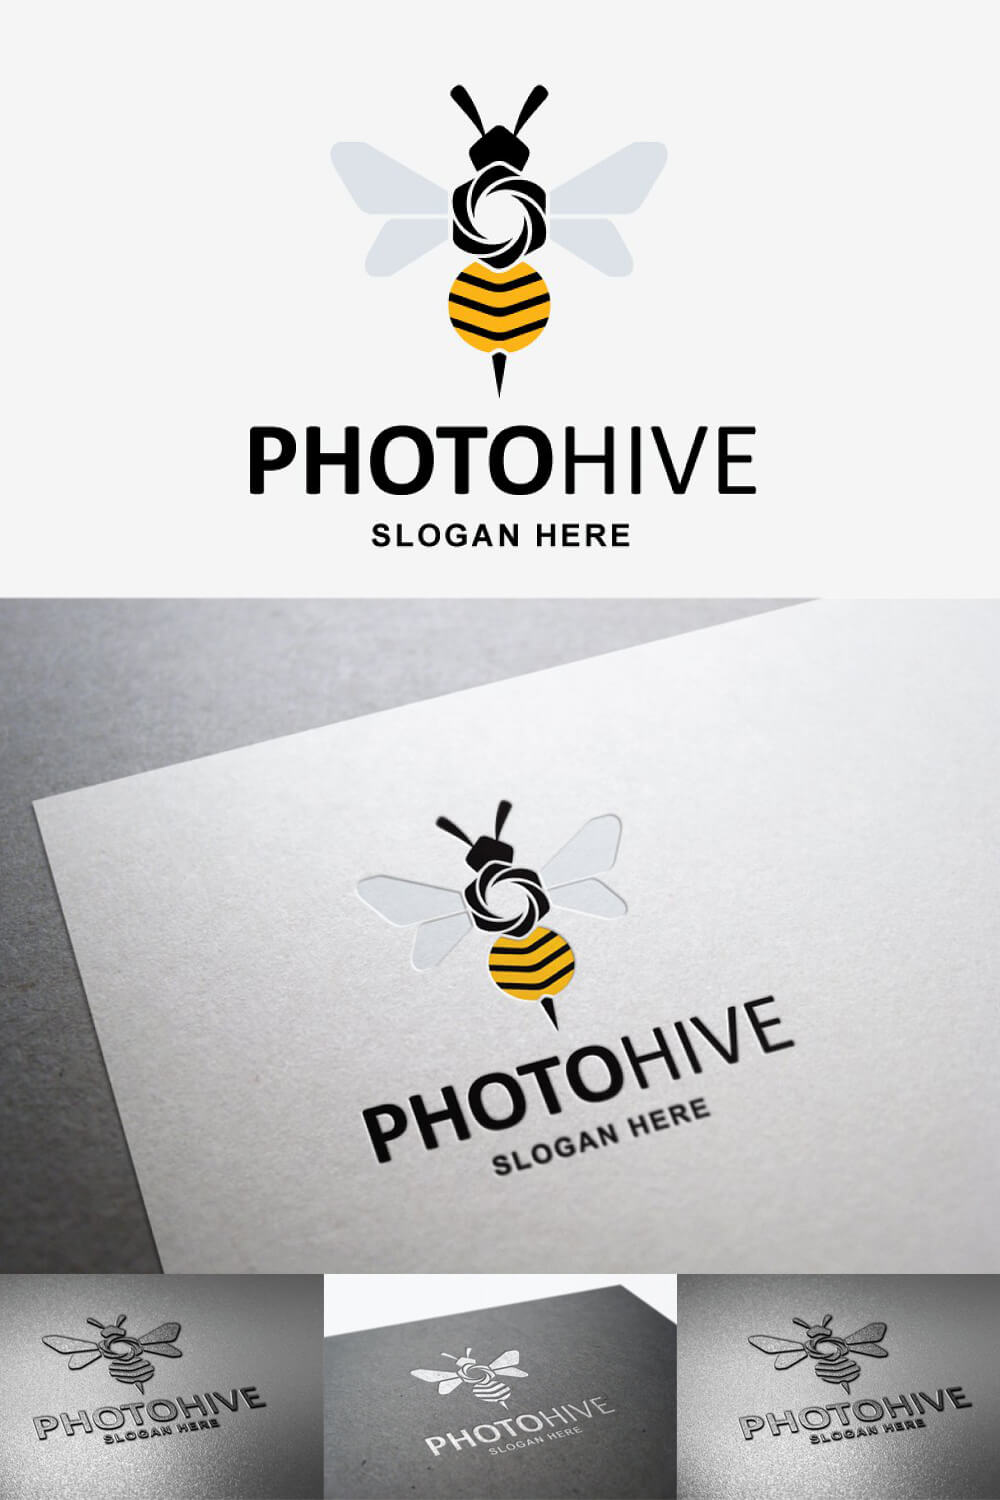 Black and yellow bee logo on a gray background.